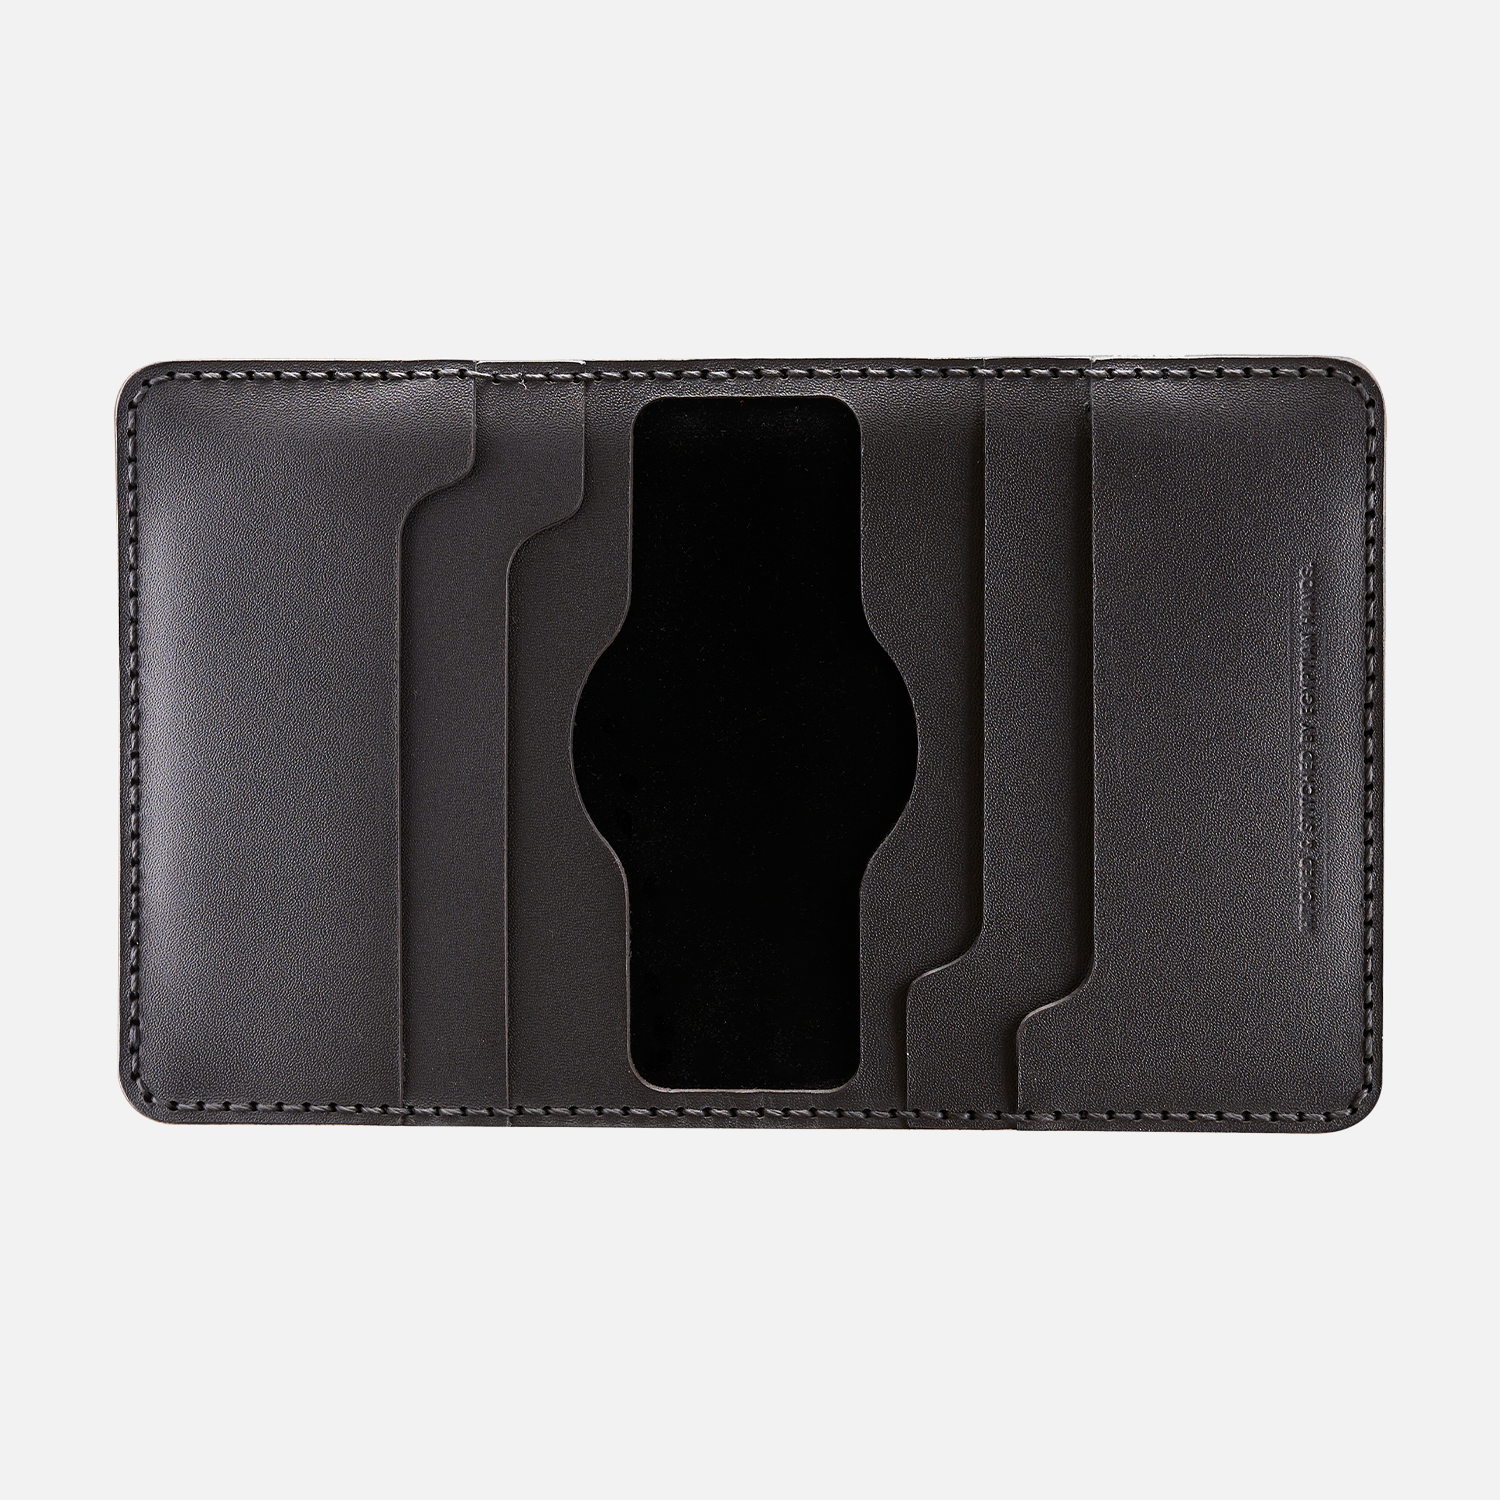 Black leather bifold wallet with multiple slots on white background.